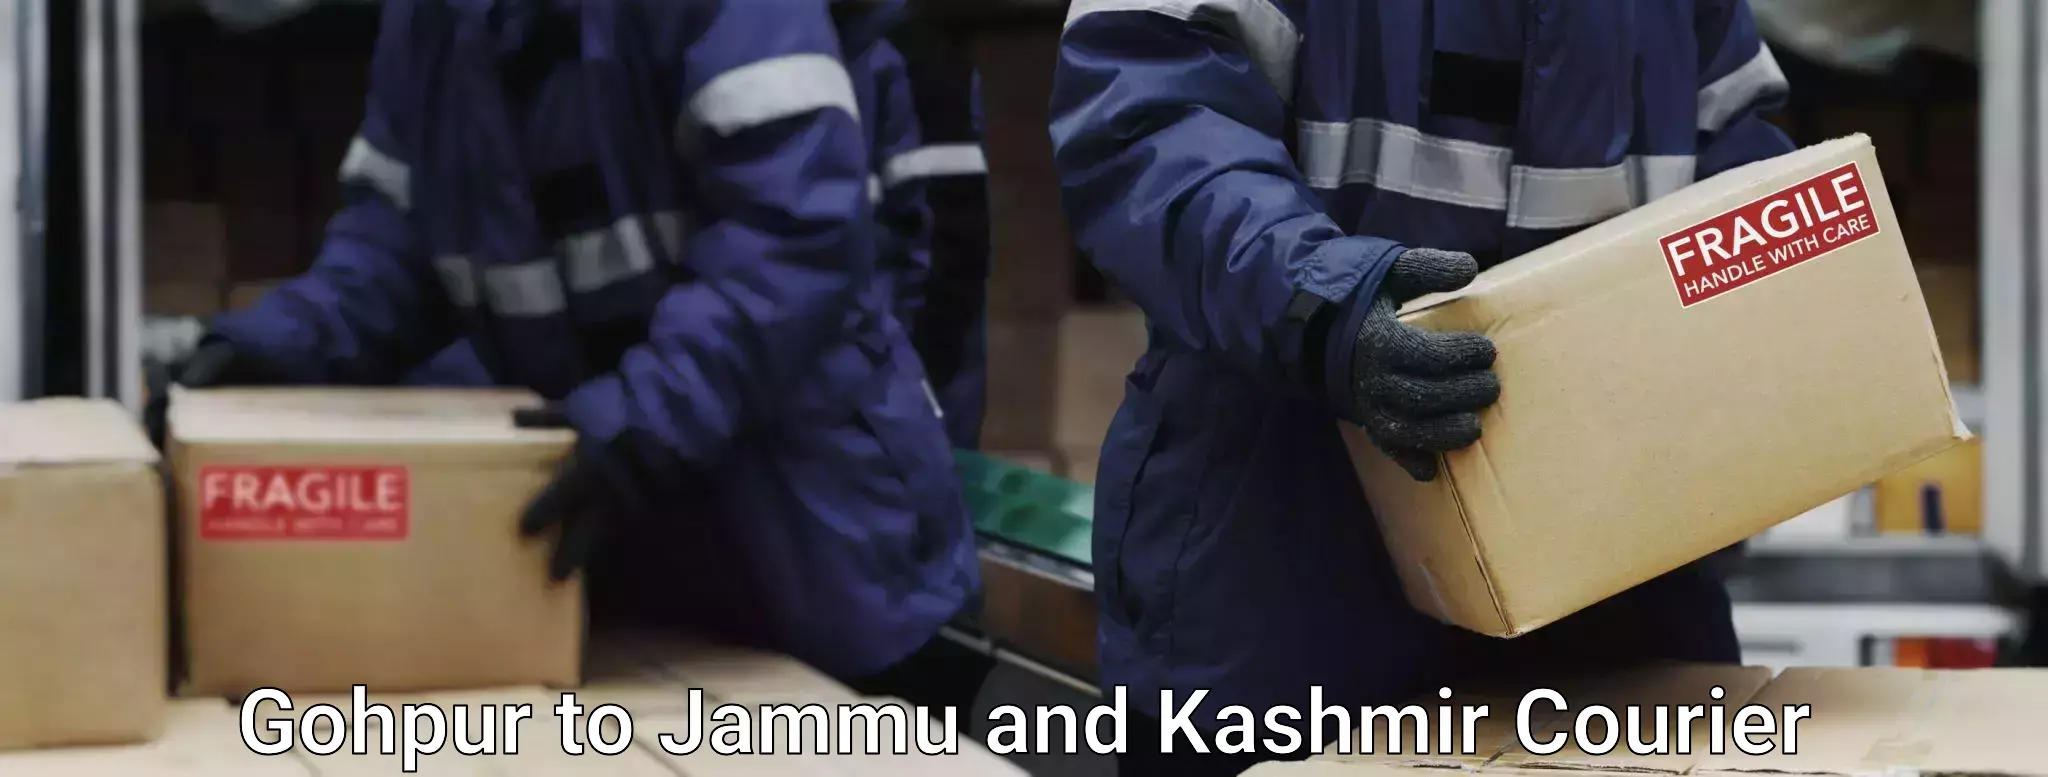 Safe luggage delivery Gohpur to Jammu and Kashmir